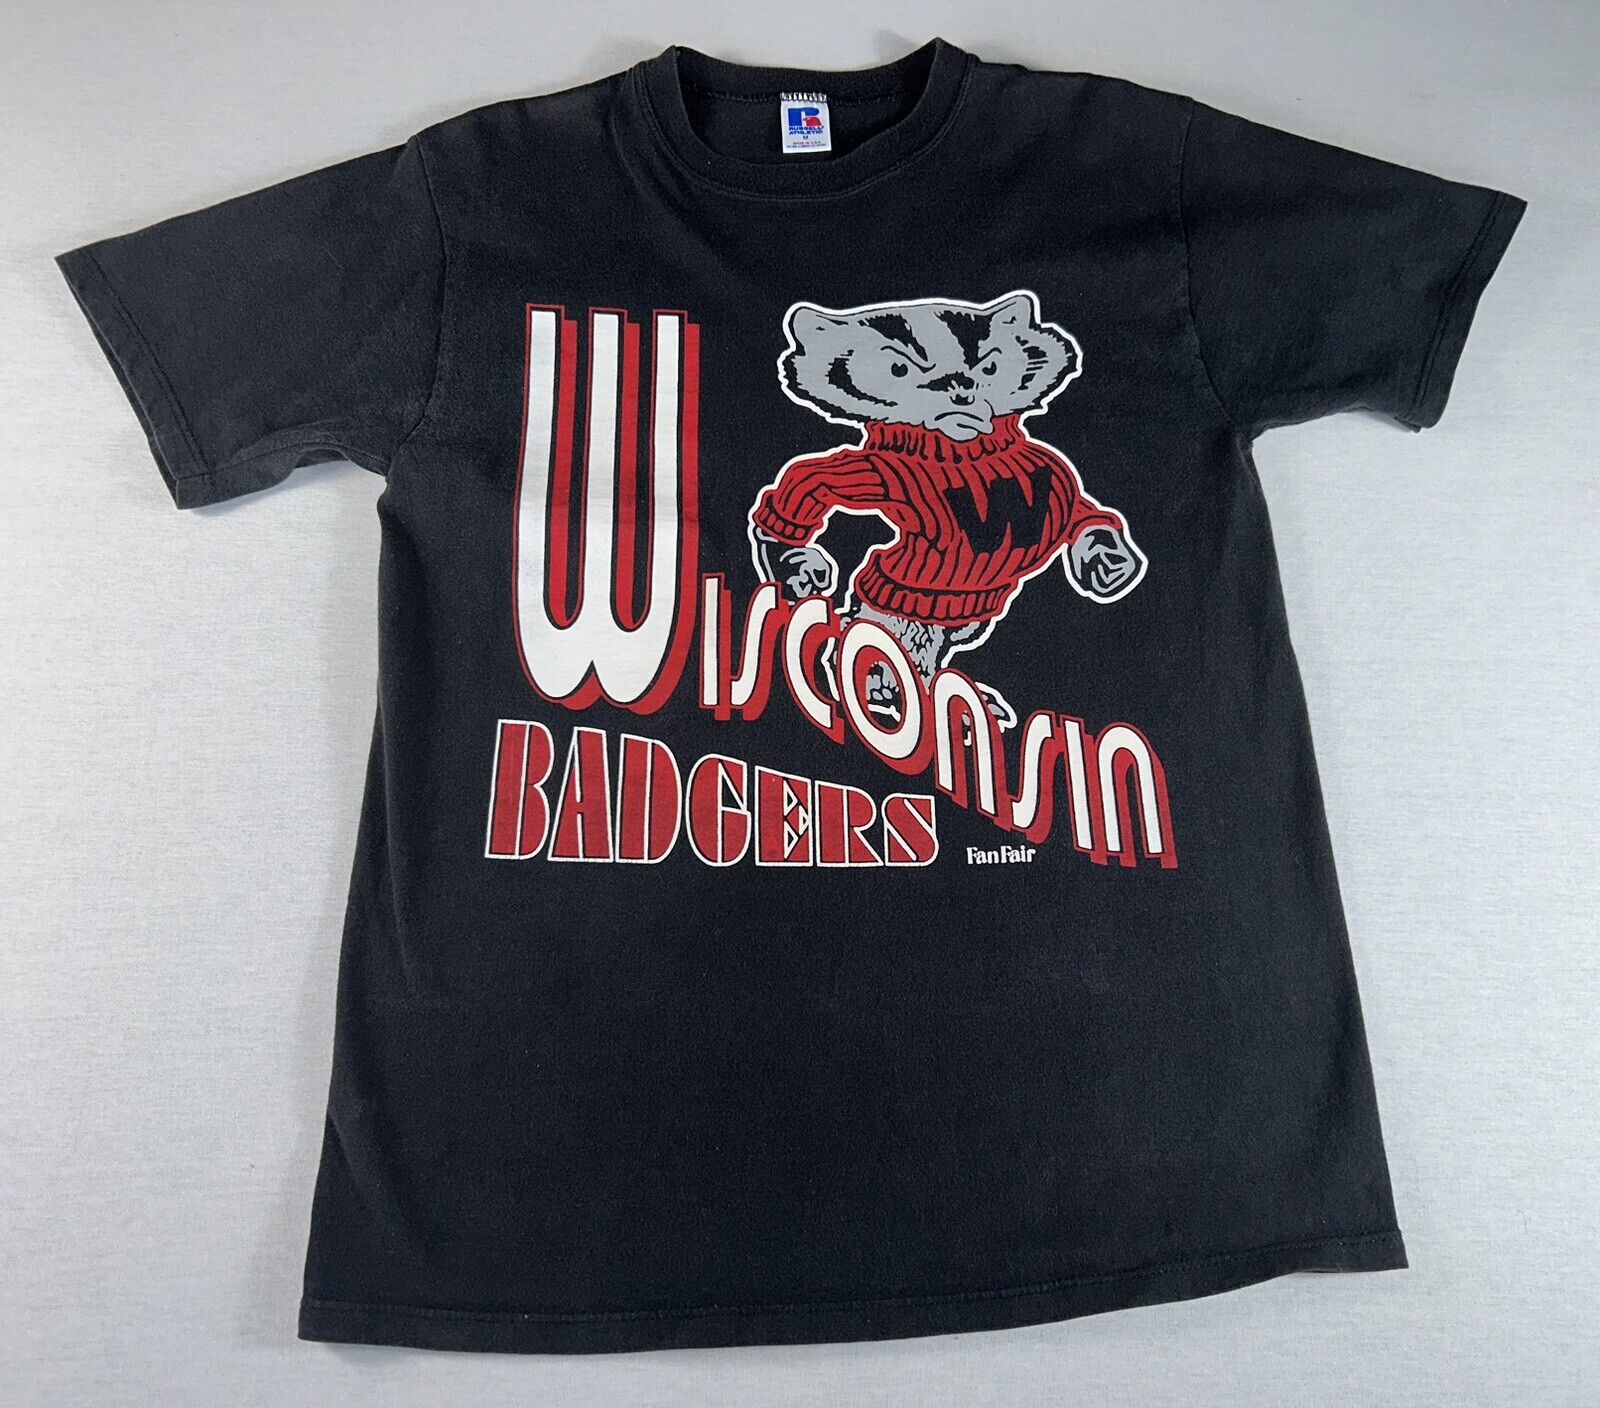 Vintage Wisconsin Badgers Shirt Size Medium/Small Graphic Bucky